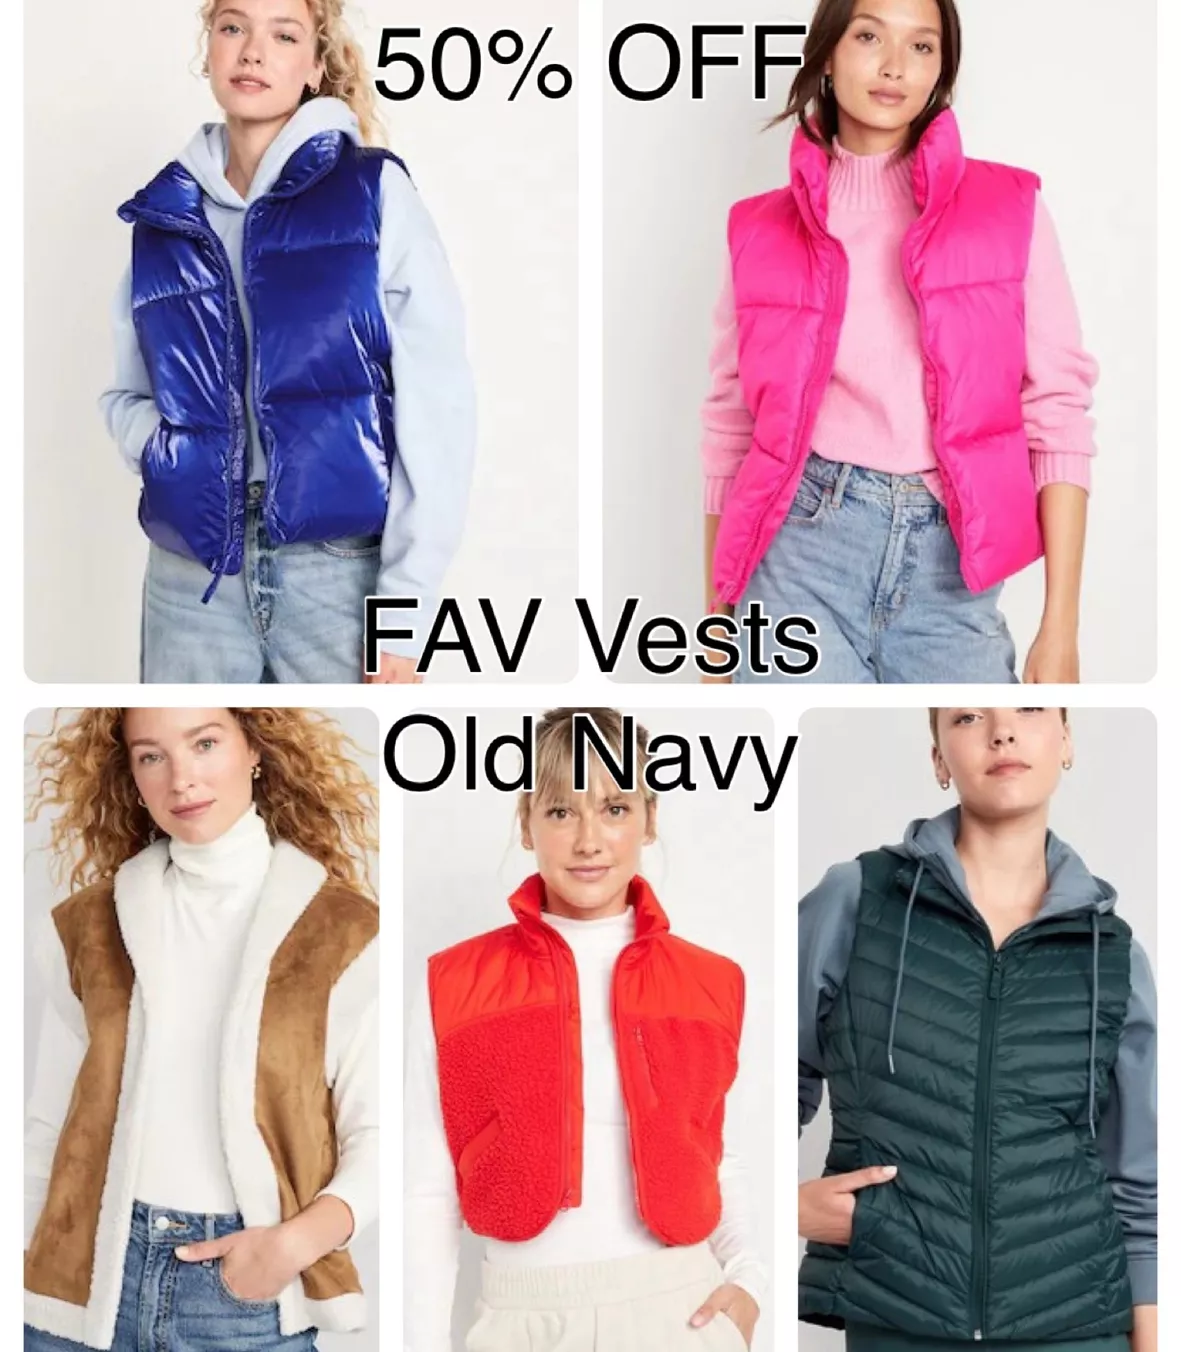 Narrow-Channel Quilted Puffer Vest